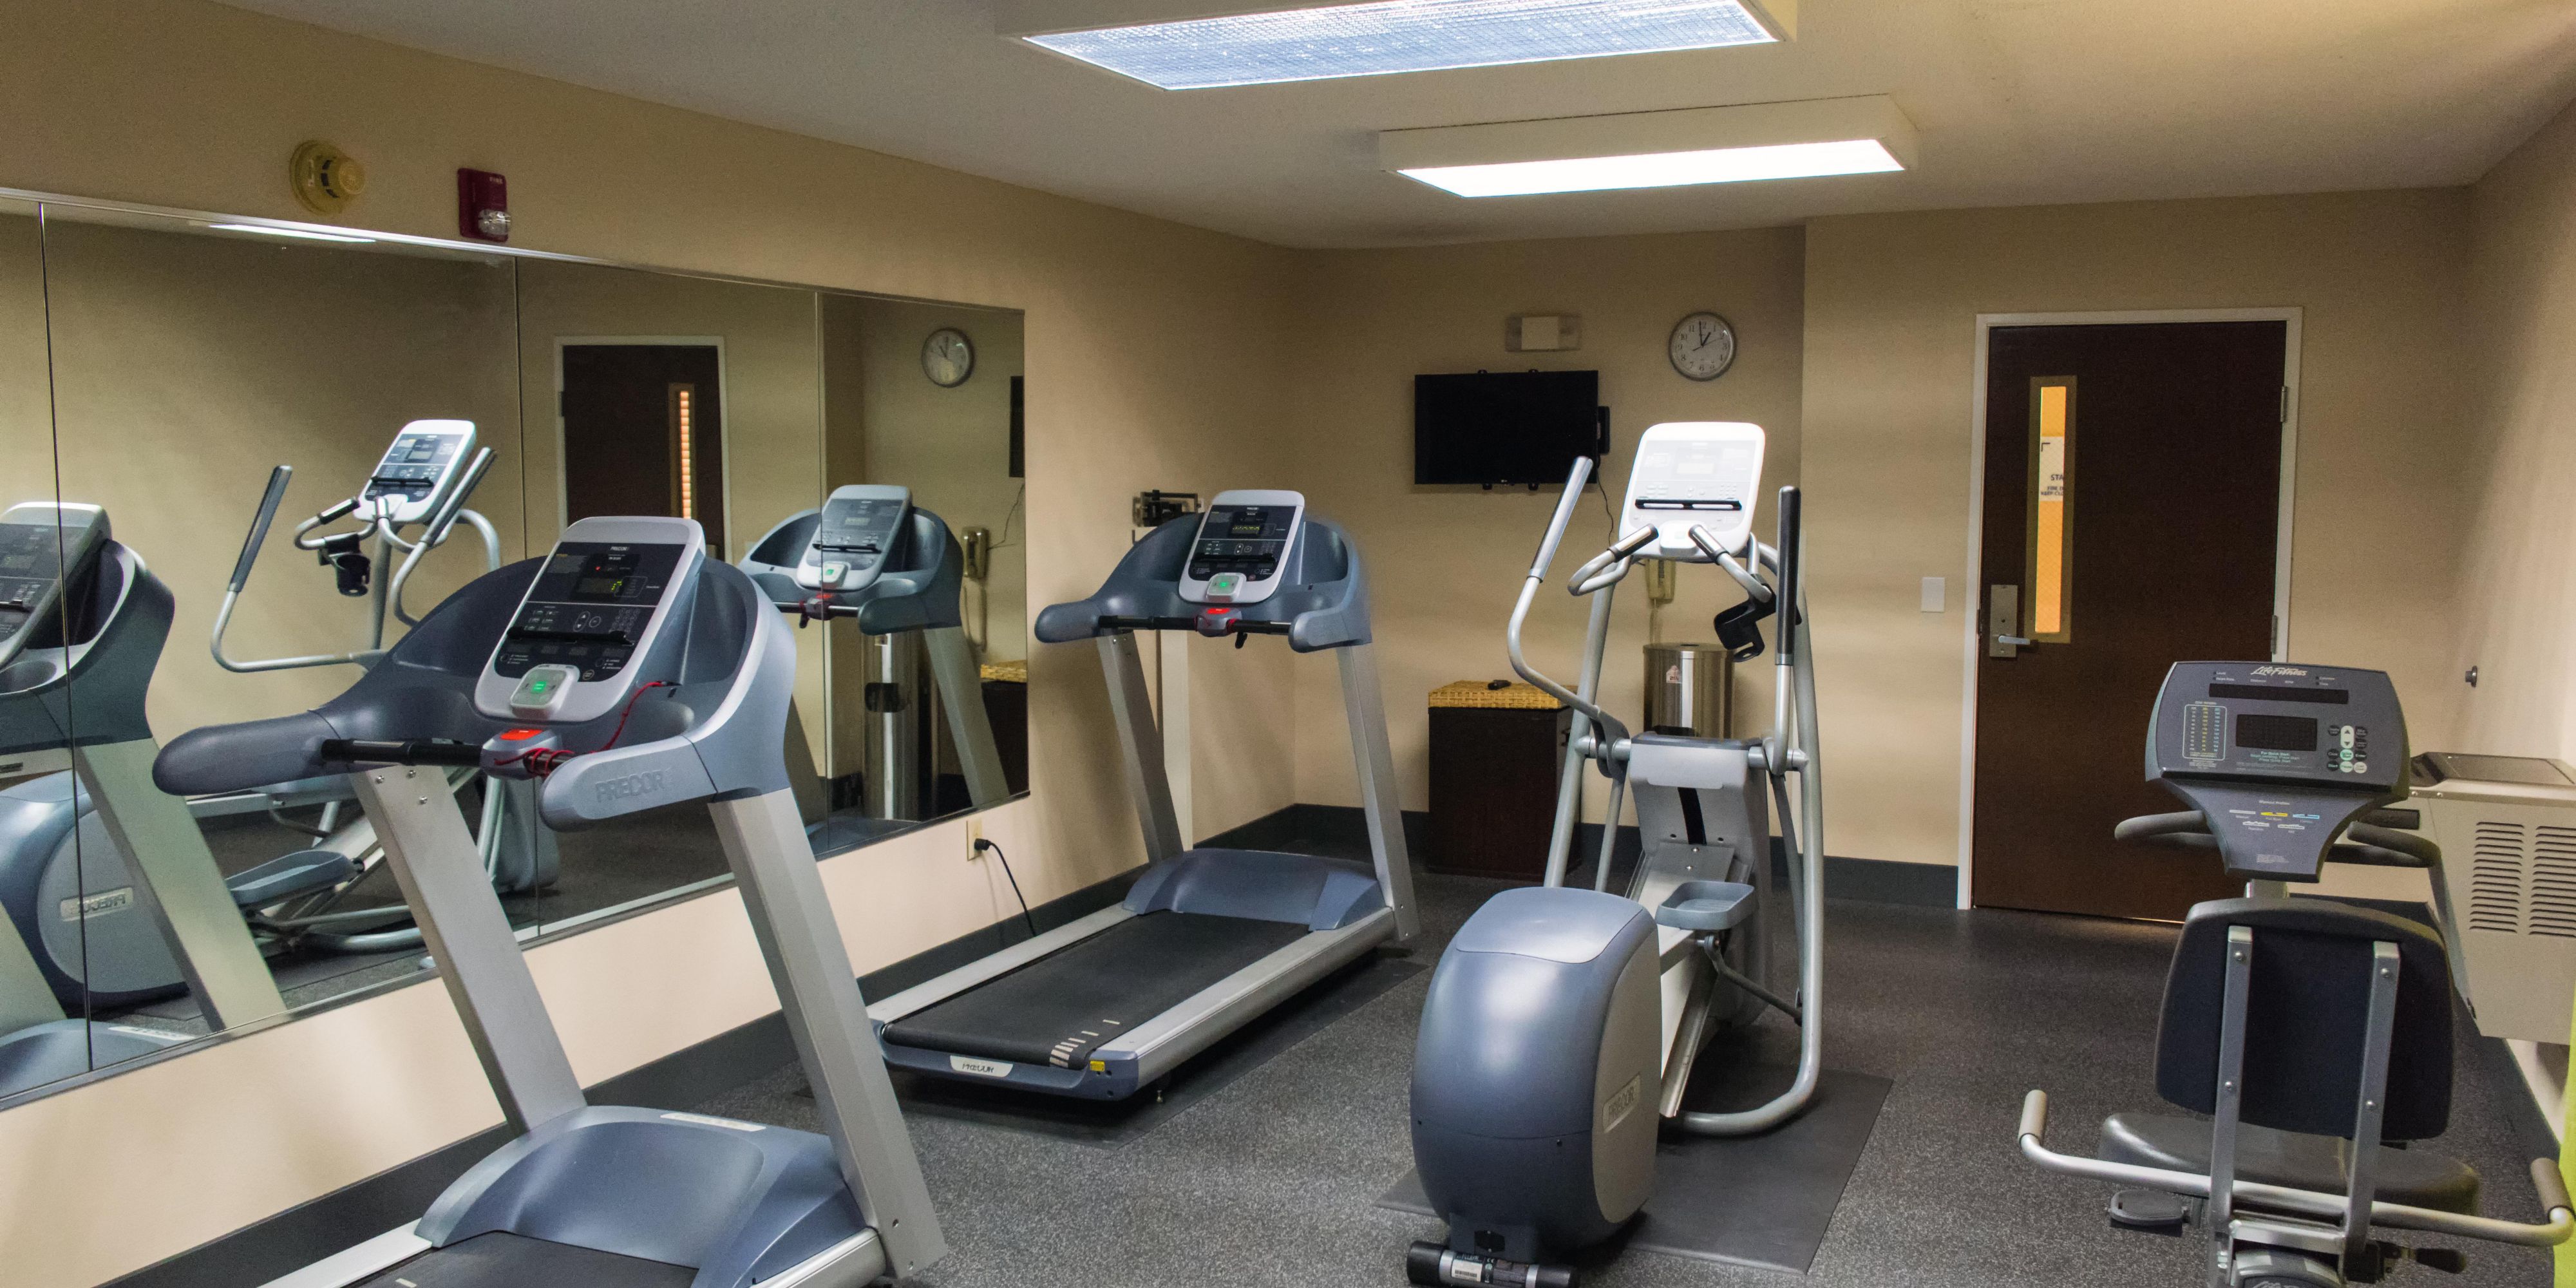 Keep up your workout routine while you stay with us in our newly renovated Fitness Center featuring an Elliptical, Treadmill and an Exercise Bike - each has their own individual TV monitor. 

In addition to our Fitness Center, our guest also get complimentary access to the TruFit Gym located less than a quarter-mile from our hotel.